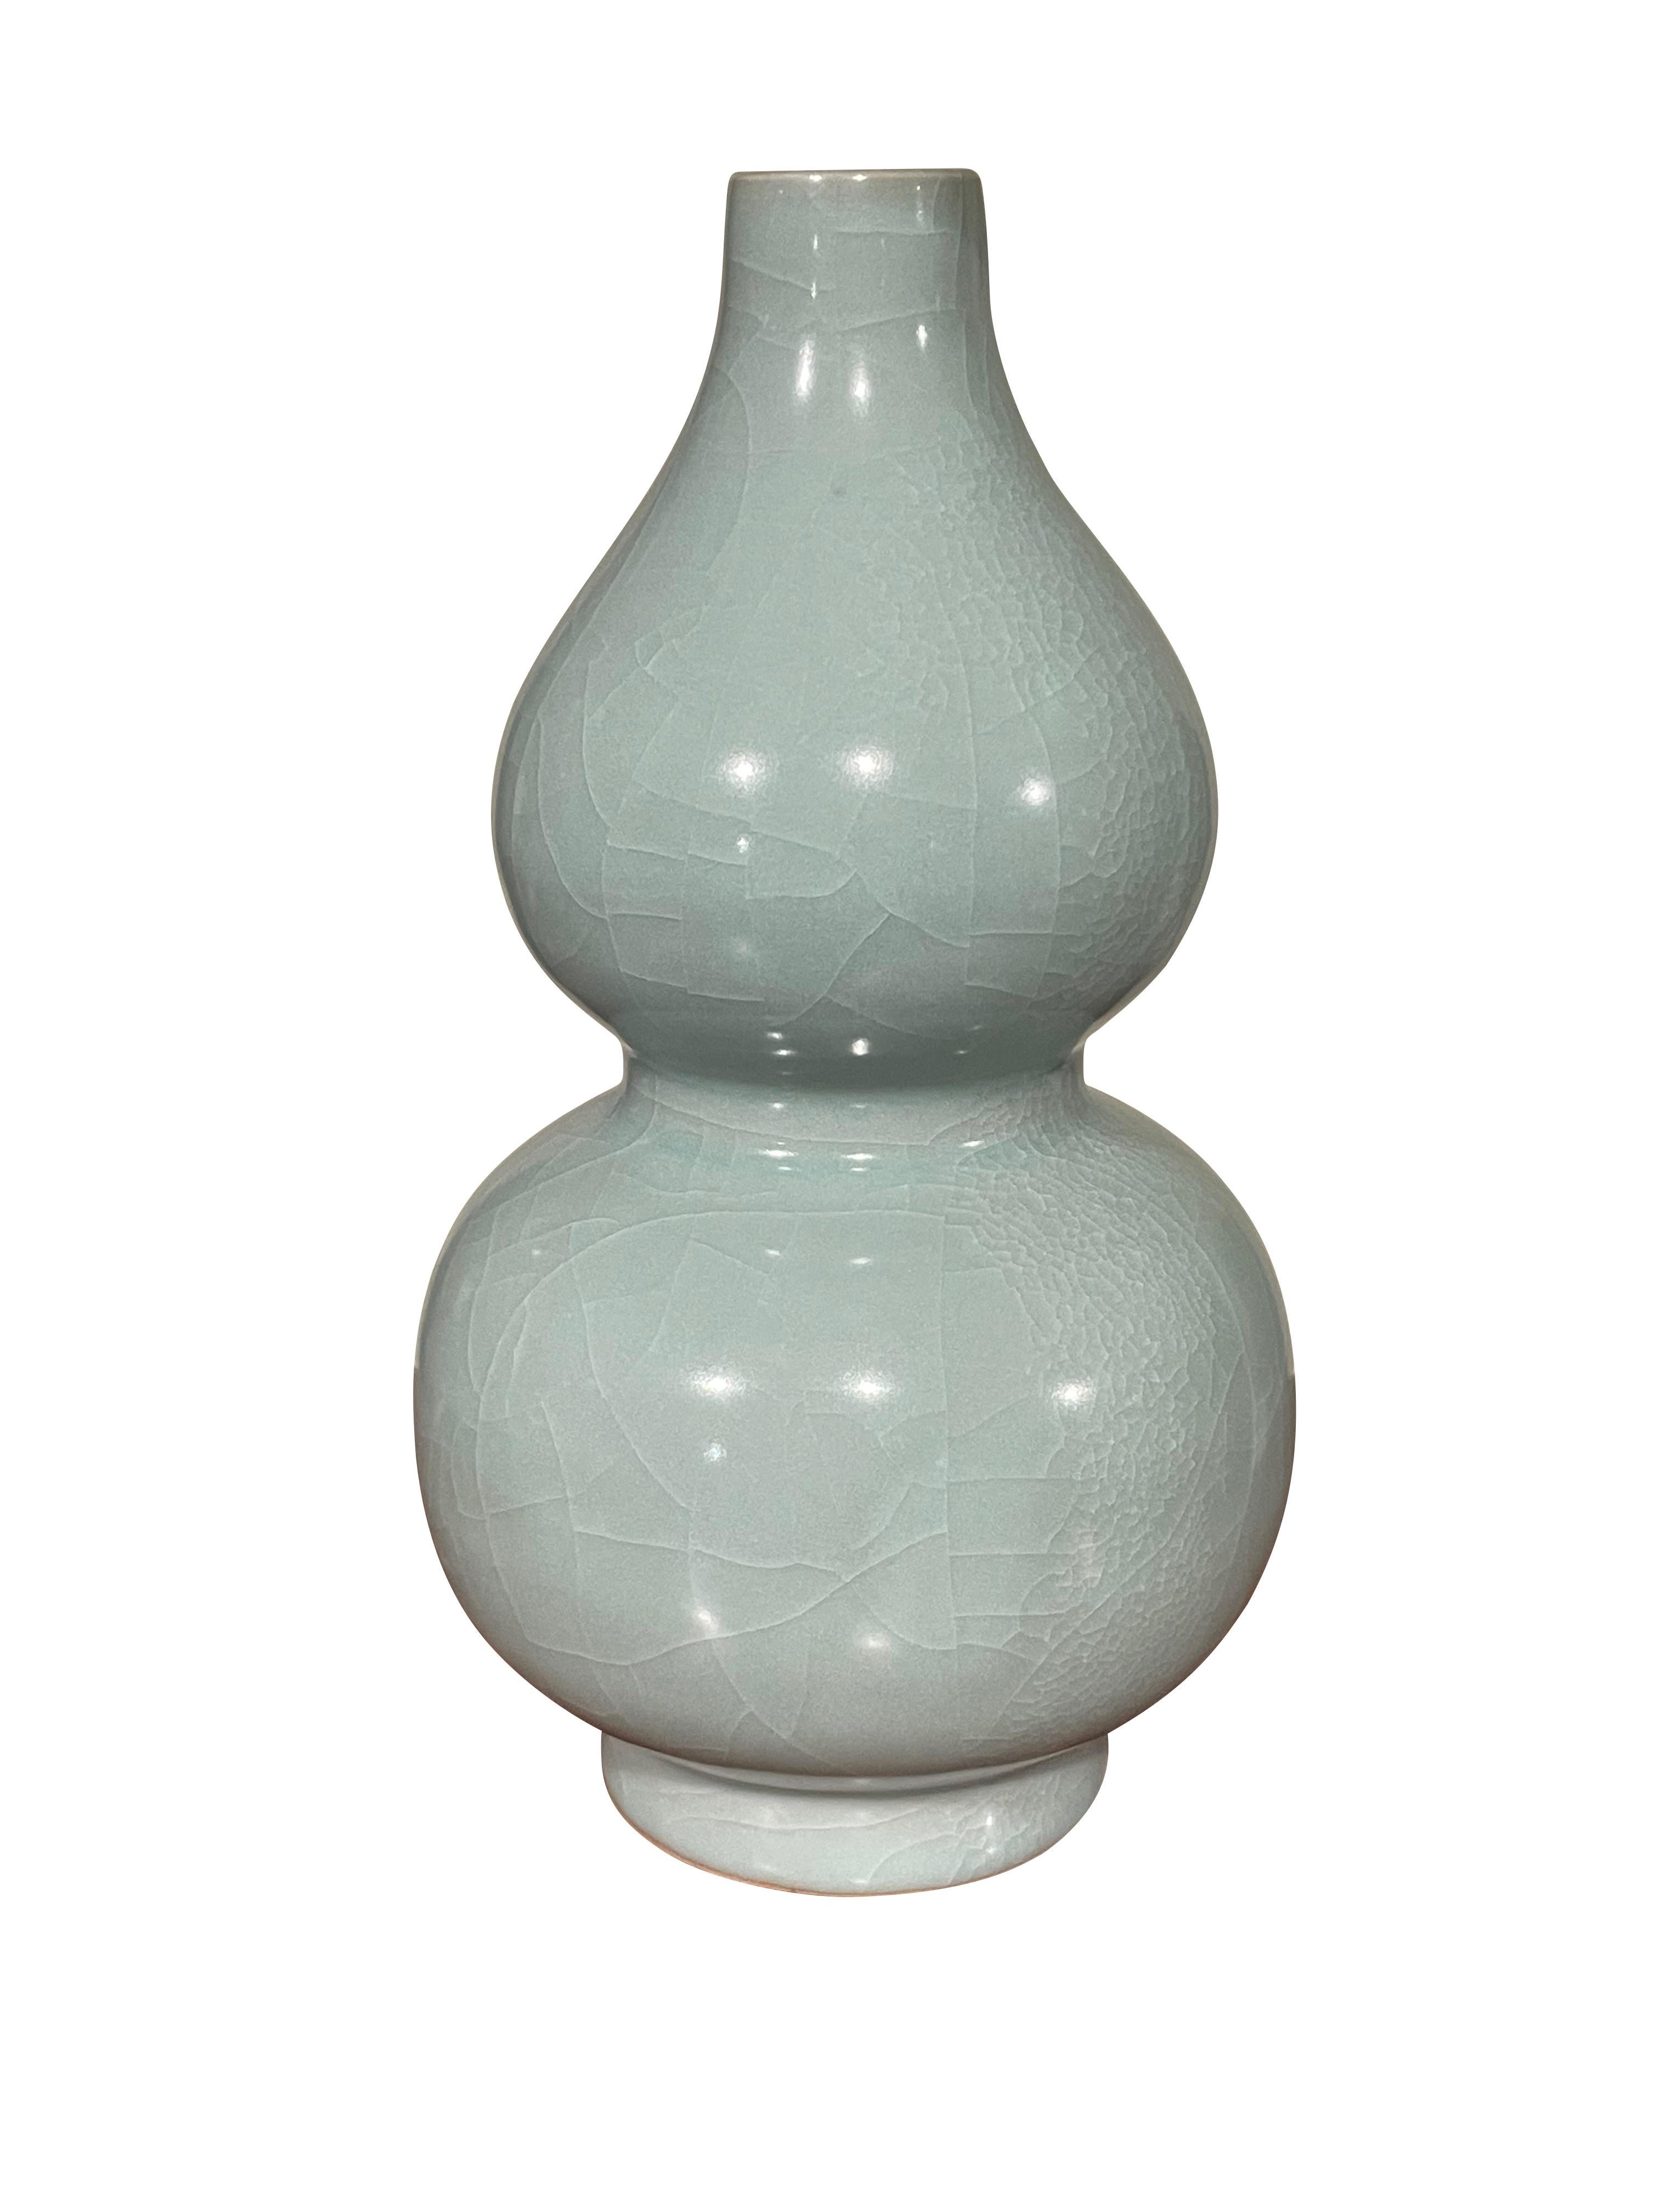 Contemporary Chinese collection of pale turquoise vases.
Large collection available with varying sizes and shapes.
Each vase is part of the collection and sold individually.
Diameter ranges 4